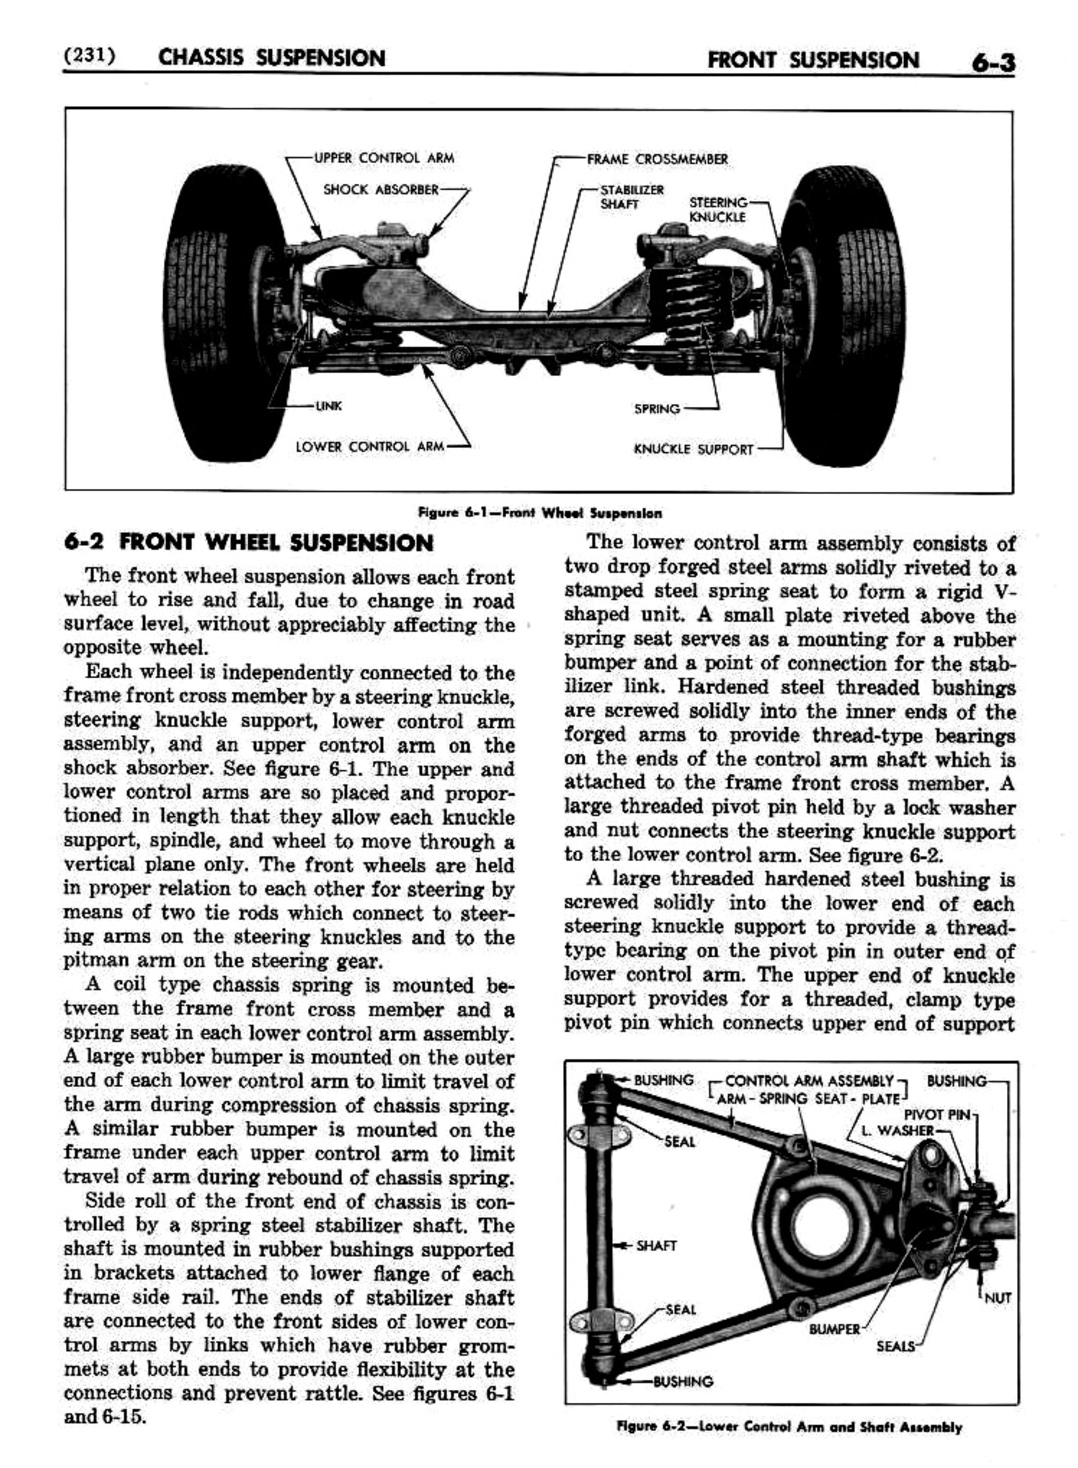 n_07 1951 Buick Shop Manual - Chassis Suspension-003-003.jpg